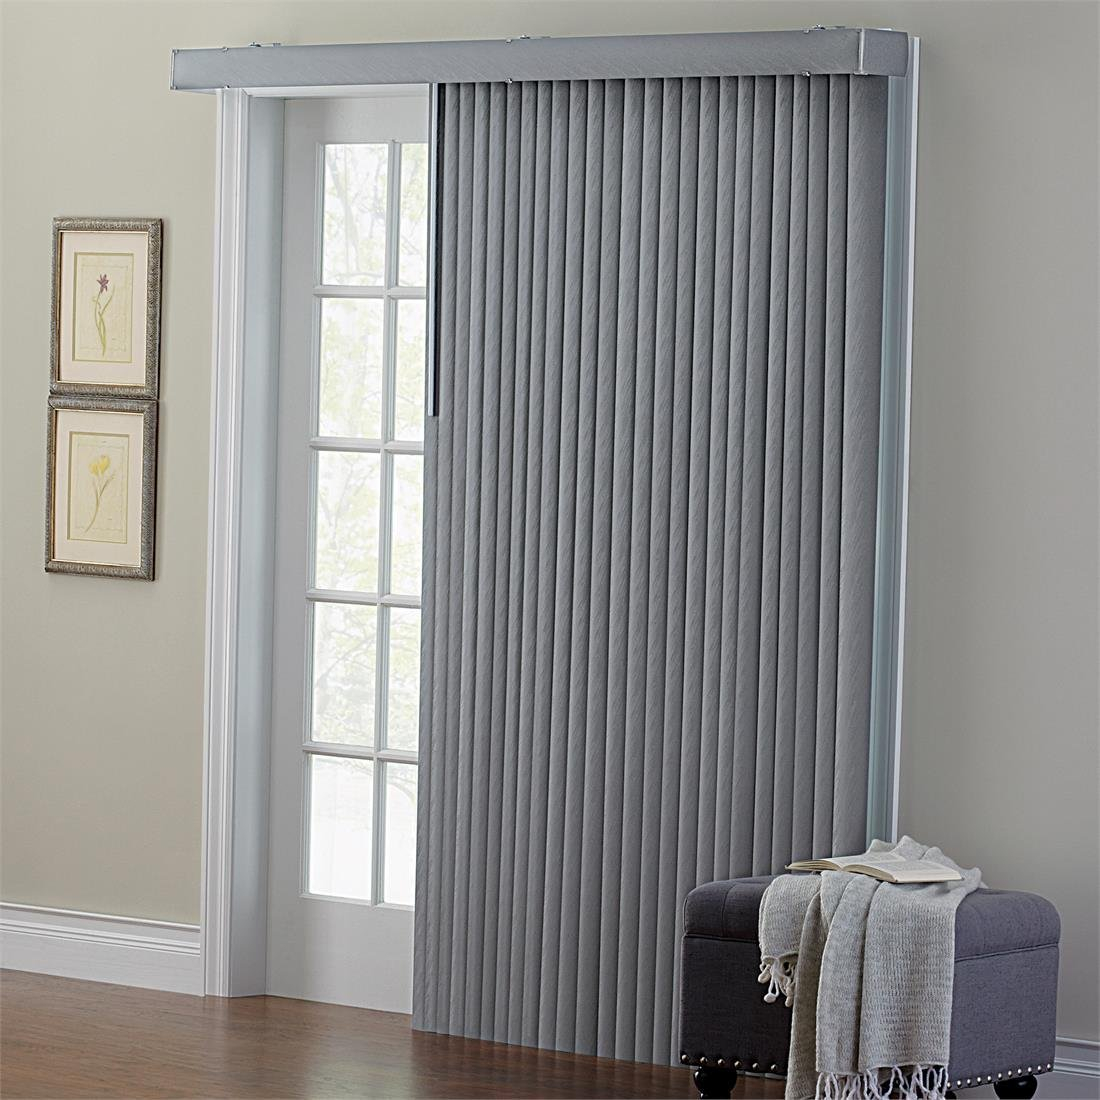 Patio Door Blinds Gray Deco Home Decor From Patio Doors pertaining to dimensions 1100 X 1100